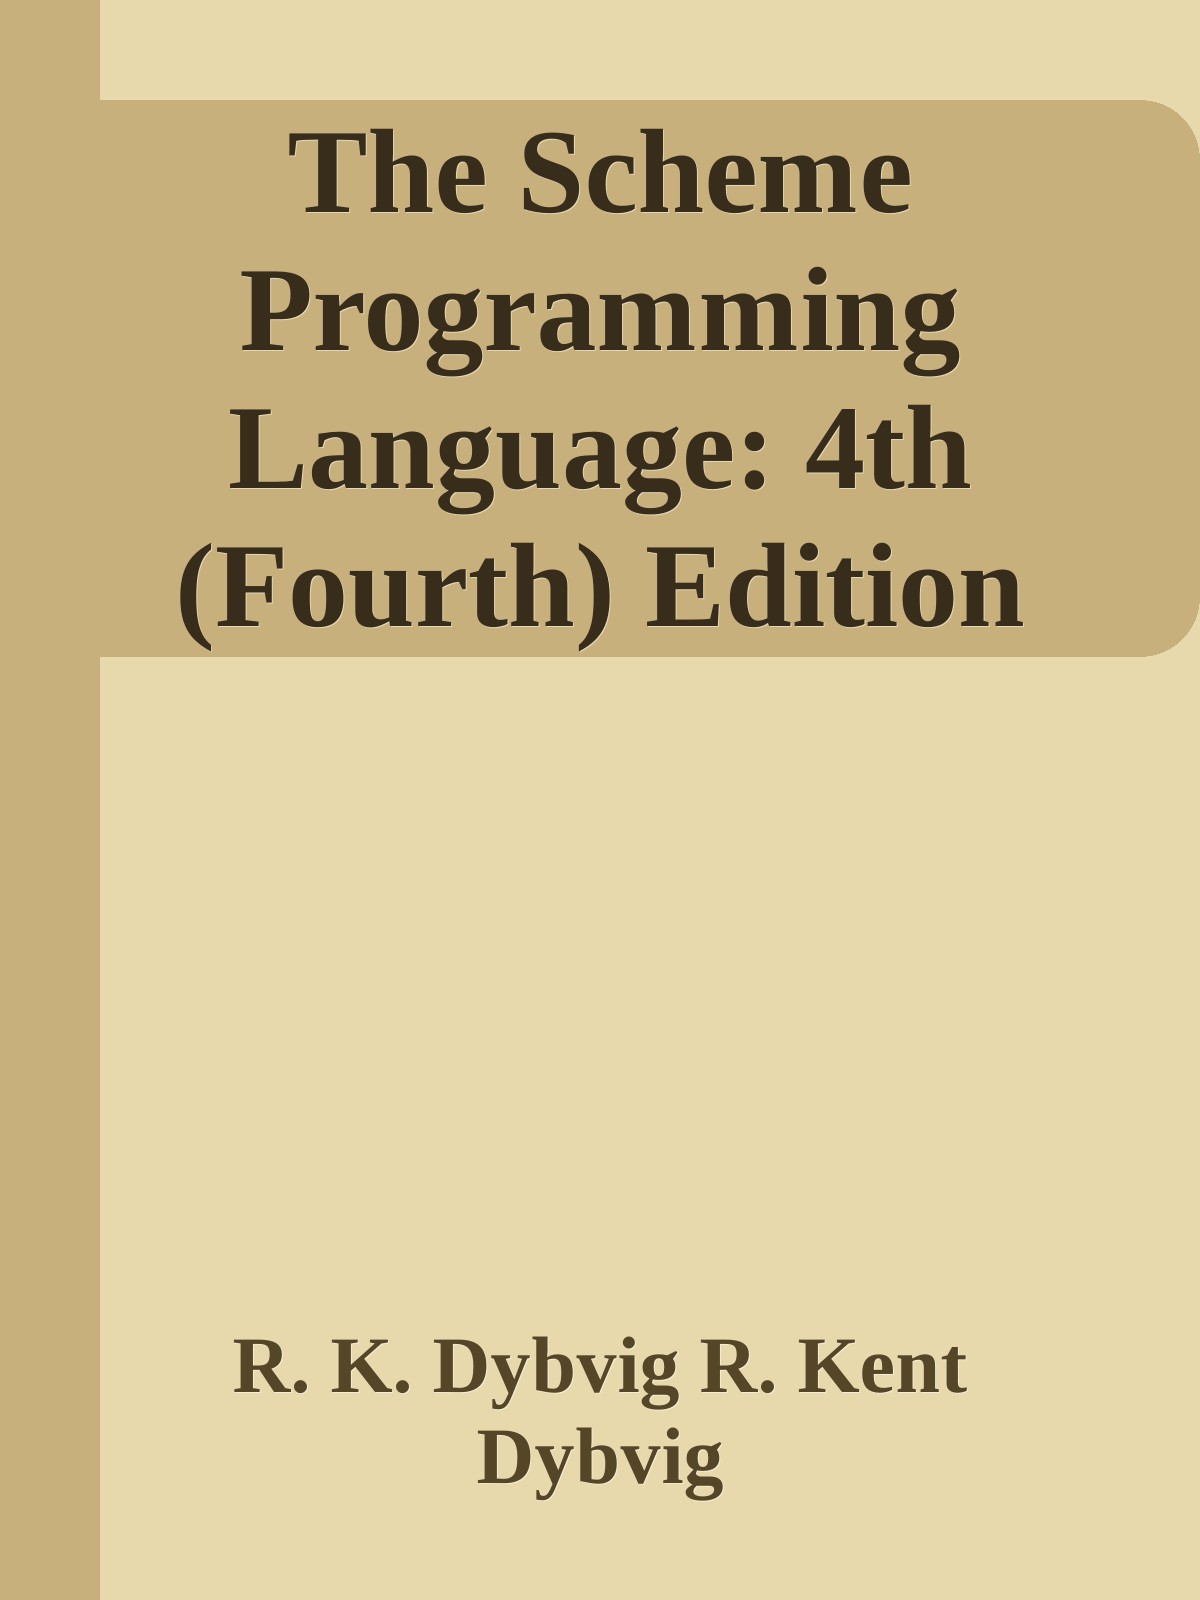 The Scheme Programming Language 4th Edition Written by R Kent Dybvig - photo 1